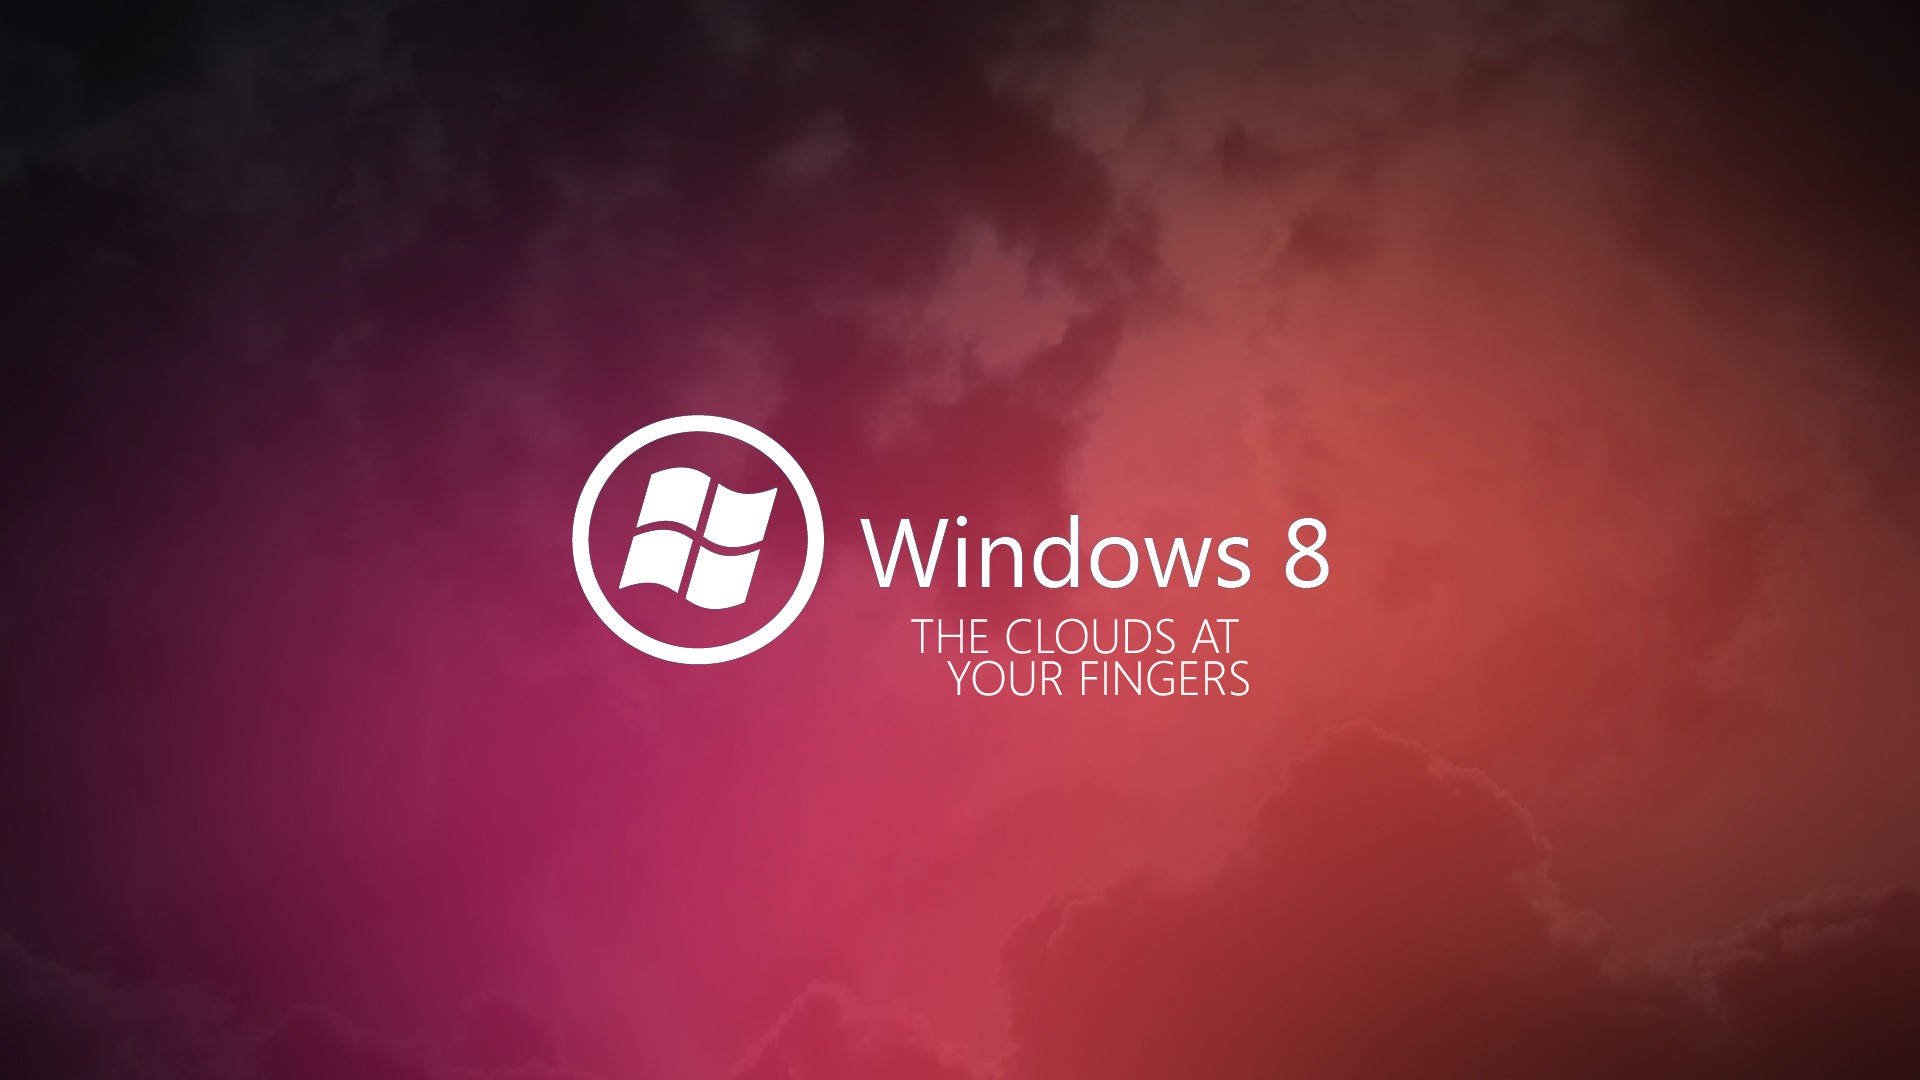 clouds, Microsoft, operating systems, Windows 8, Microsoft Windows, windows - desktop wallpaper